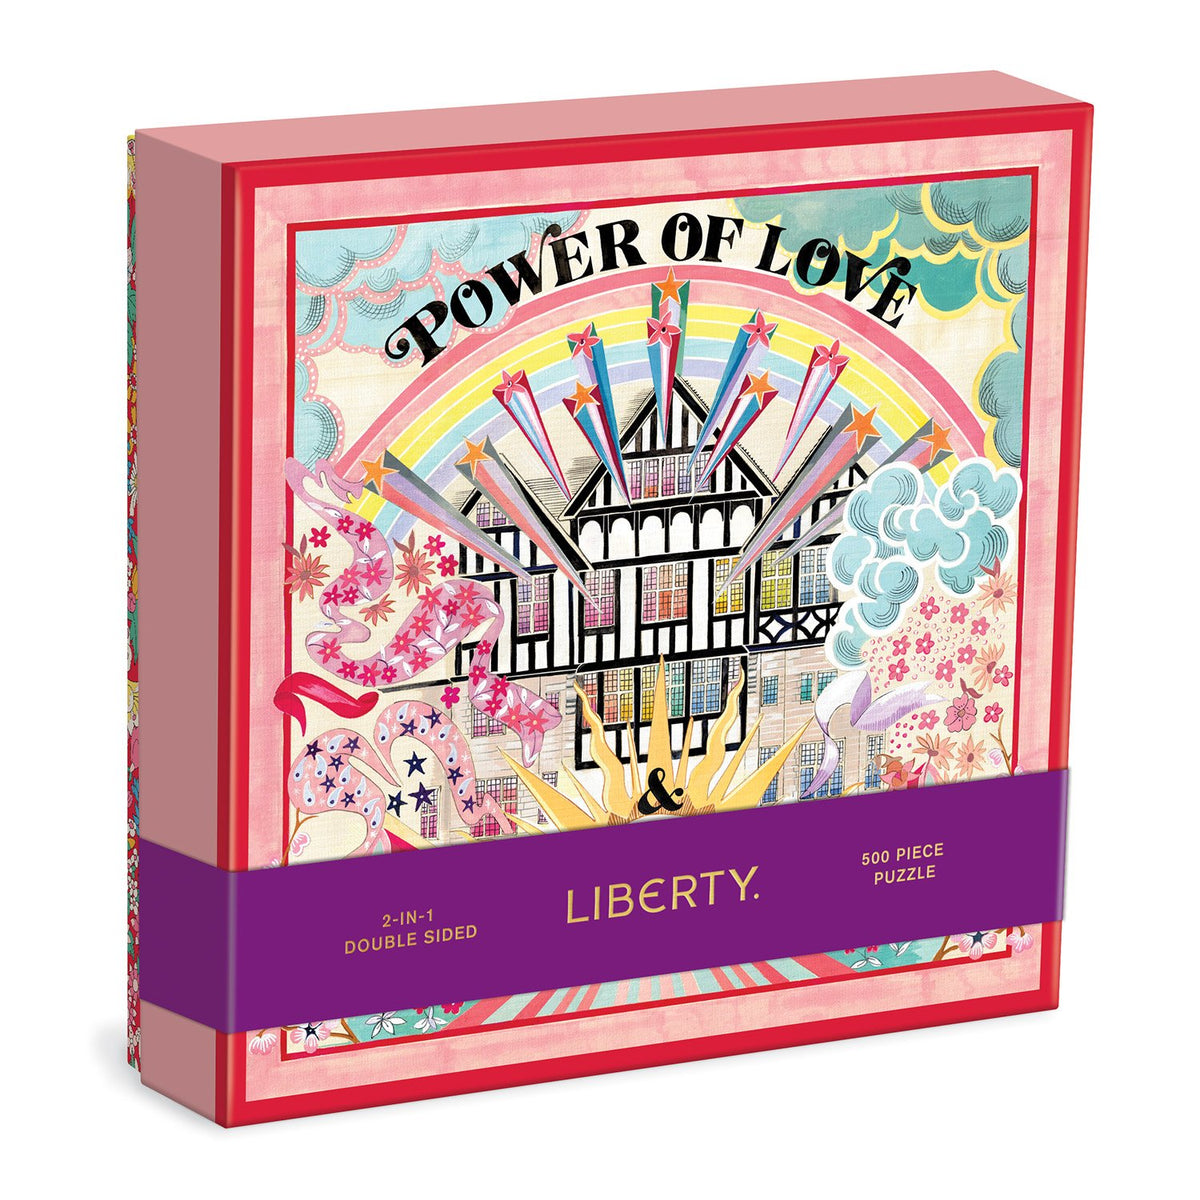 Puzzle 500 pièces double-face Liberty Power of Love